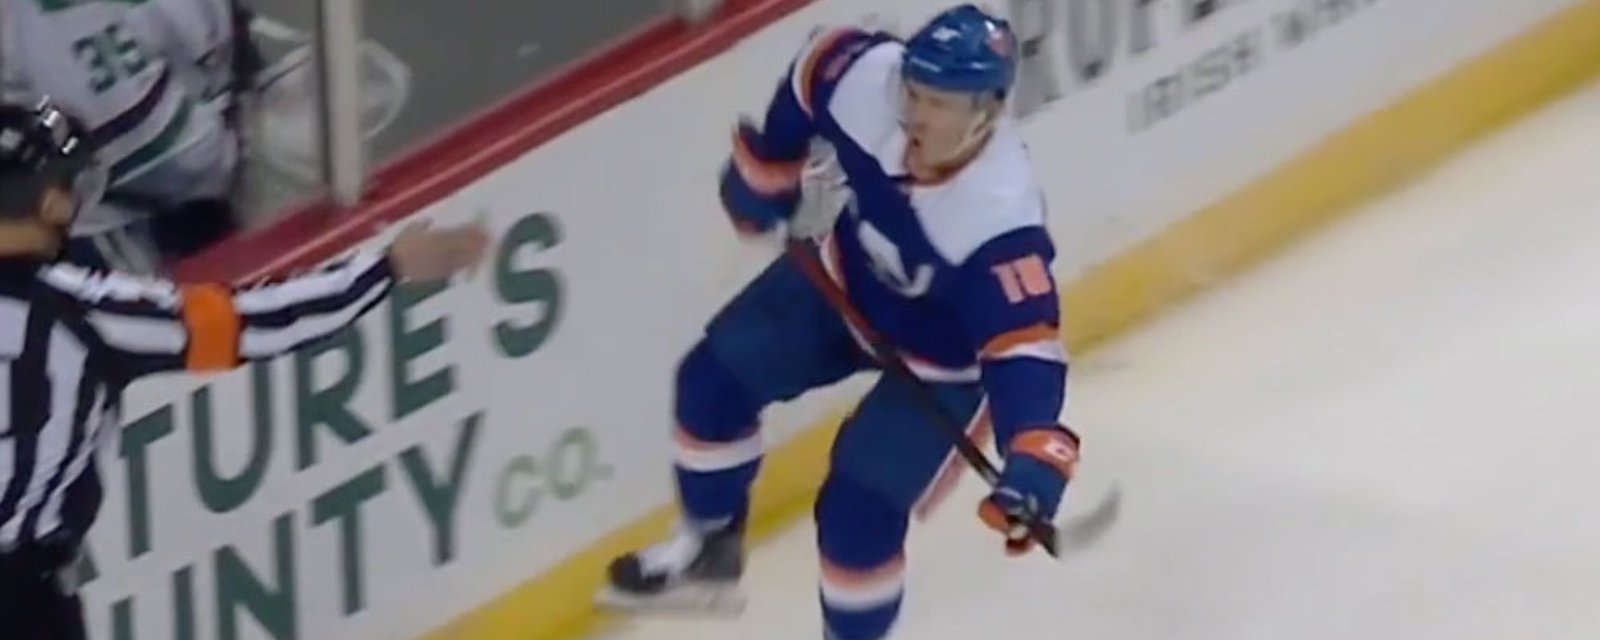 Beauvillier trying to impress Anna Kendrick with this cheeky move? 